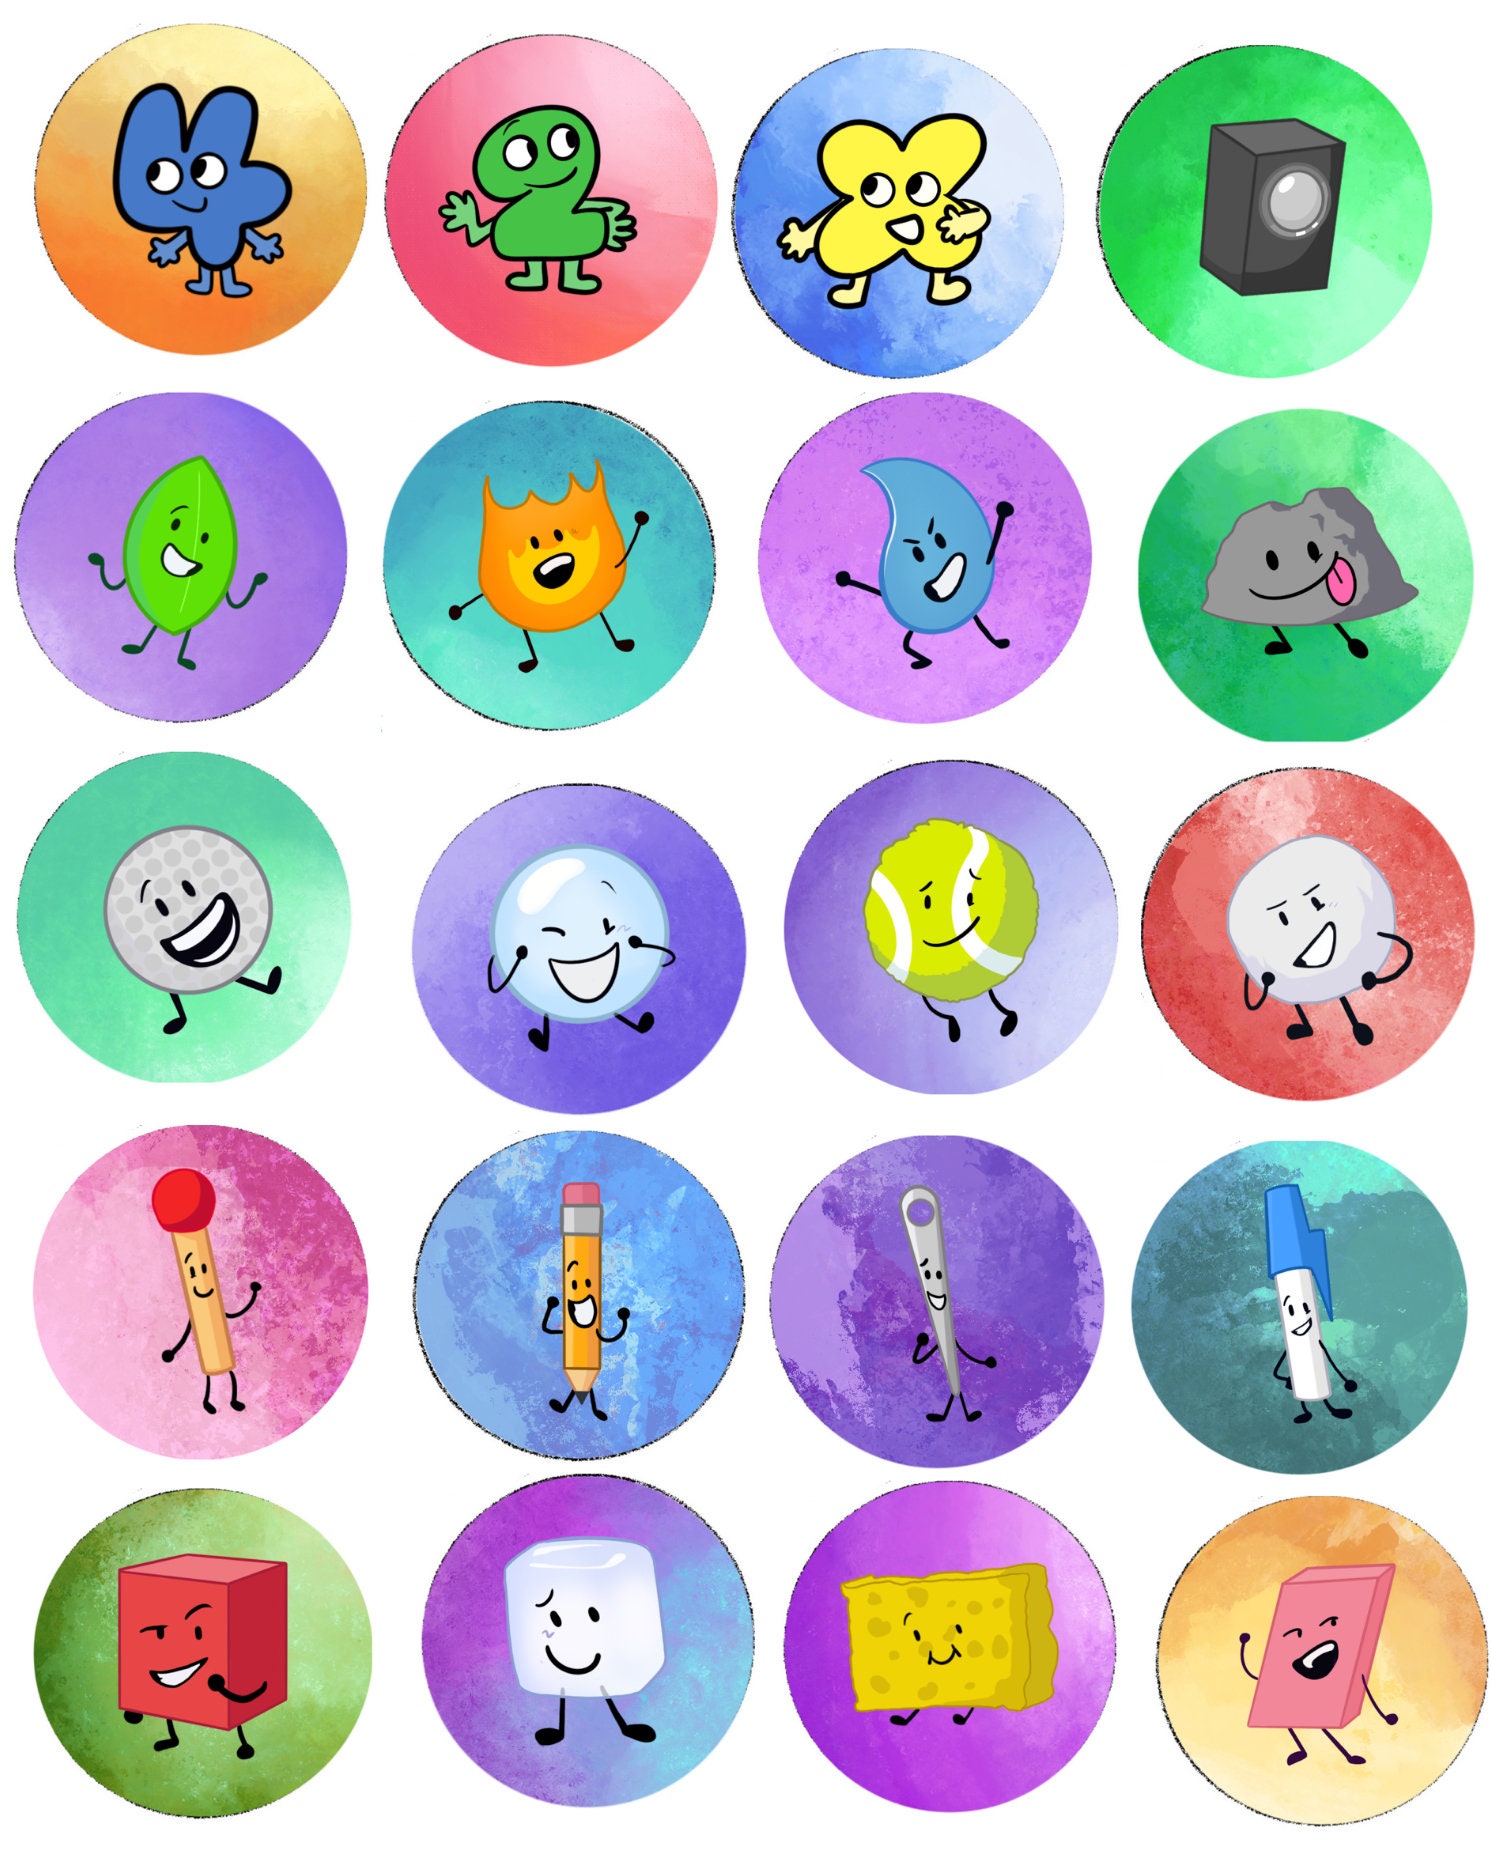 Some of my BFDI comics + a few other shows! : r/BattleForDreamIsland